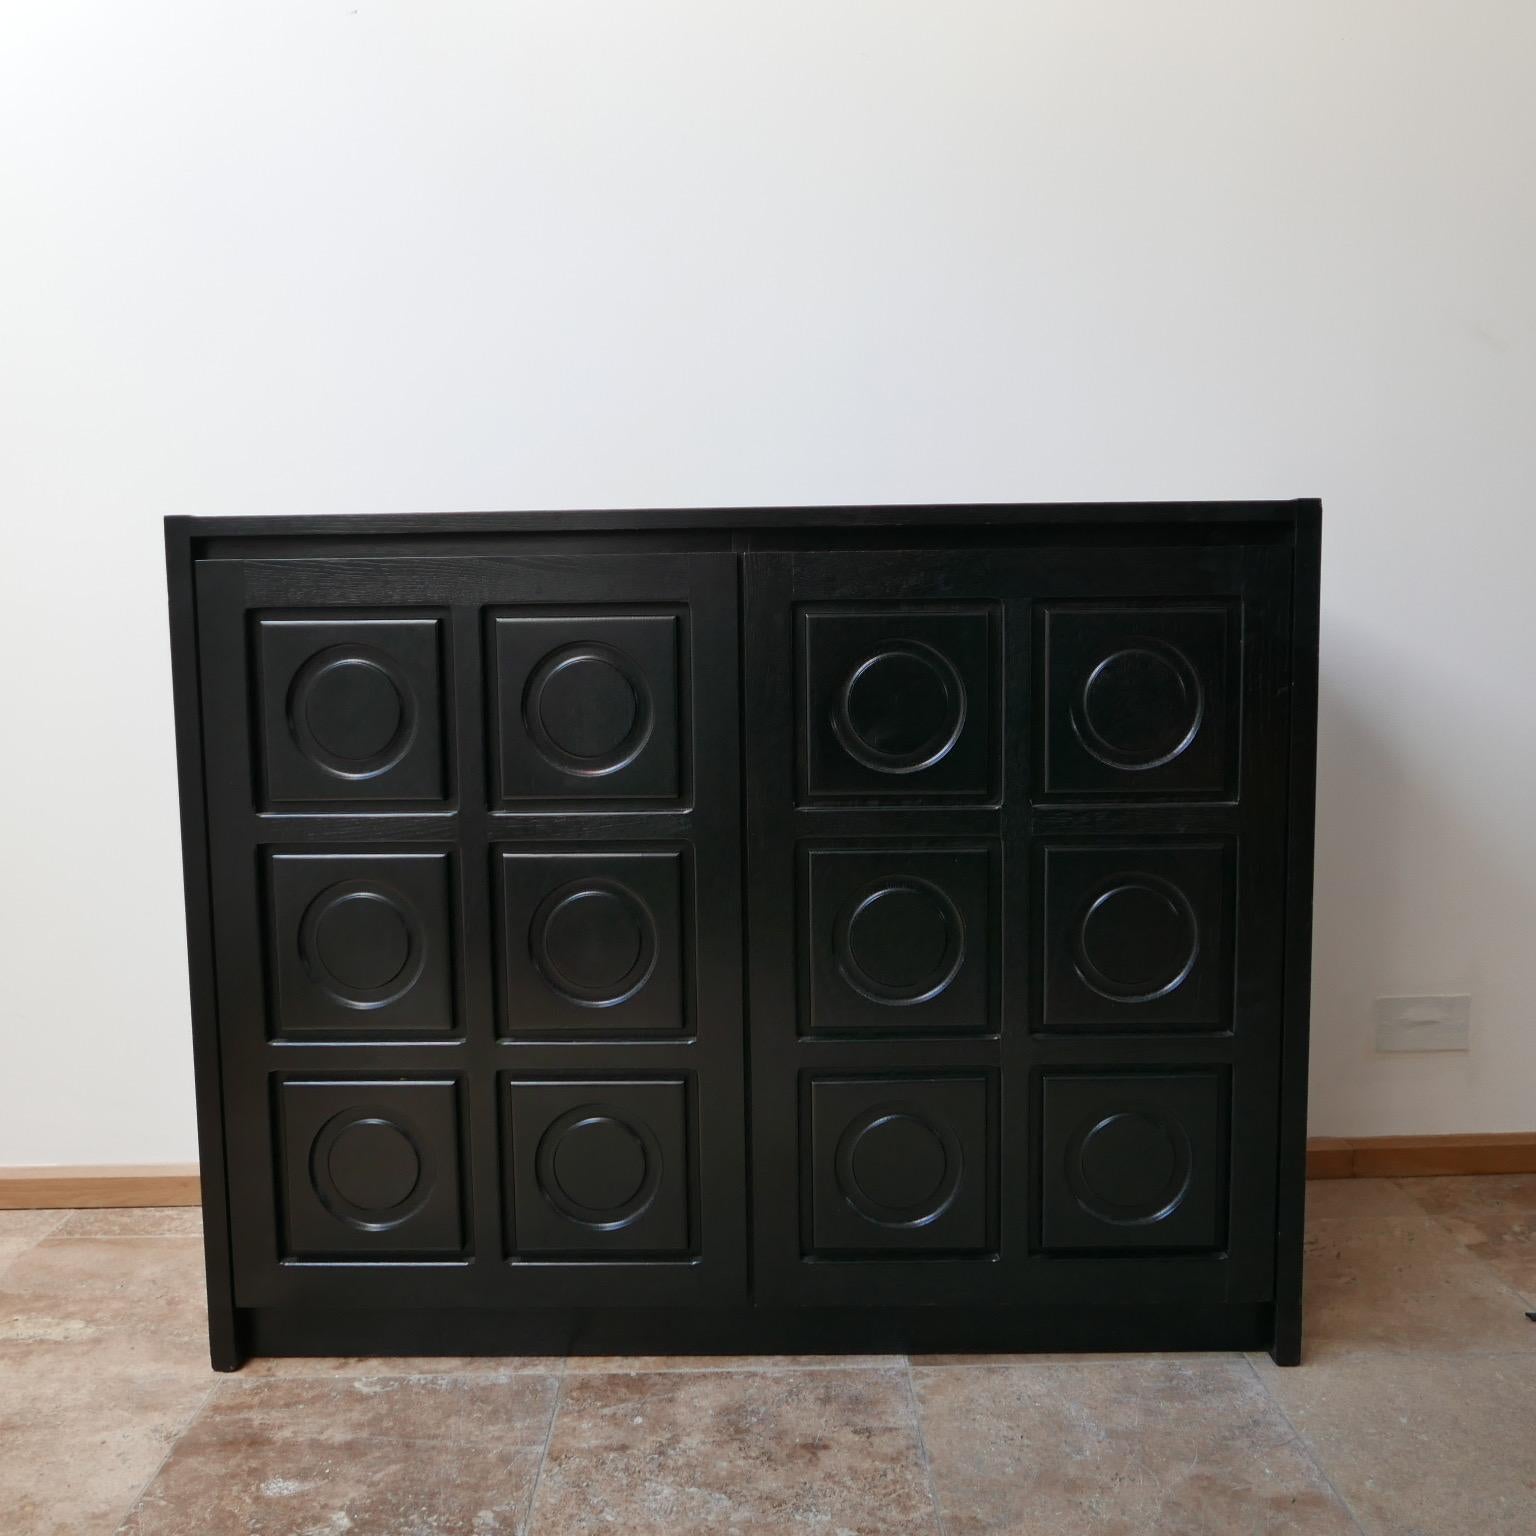 A Brutalist mid-sized sideboard or credenza in the manner of De Coene. 

Belgium, circa 1970s. 

Two doors reveal shelving and drawers internally. 

Dimensions: 128.5 W x 46 D x 100 H in cm. 

 